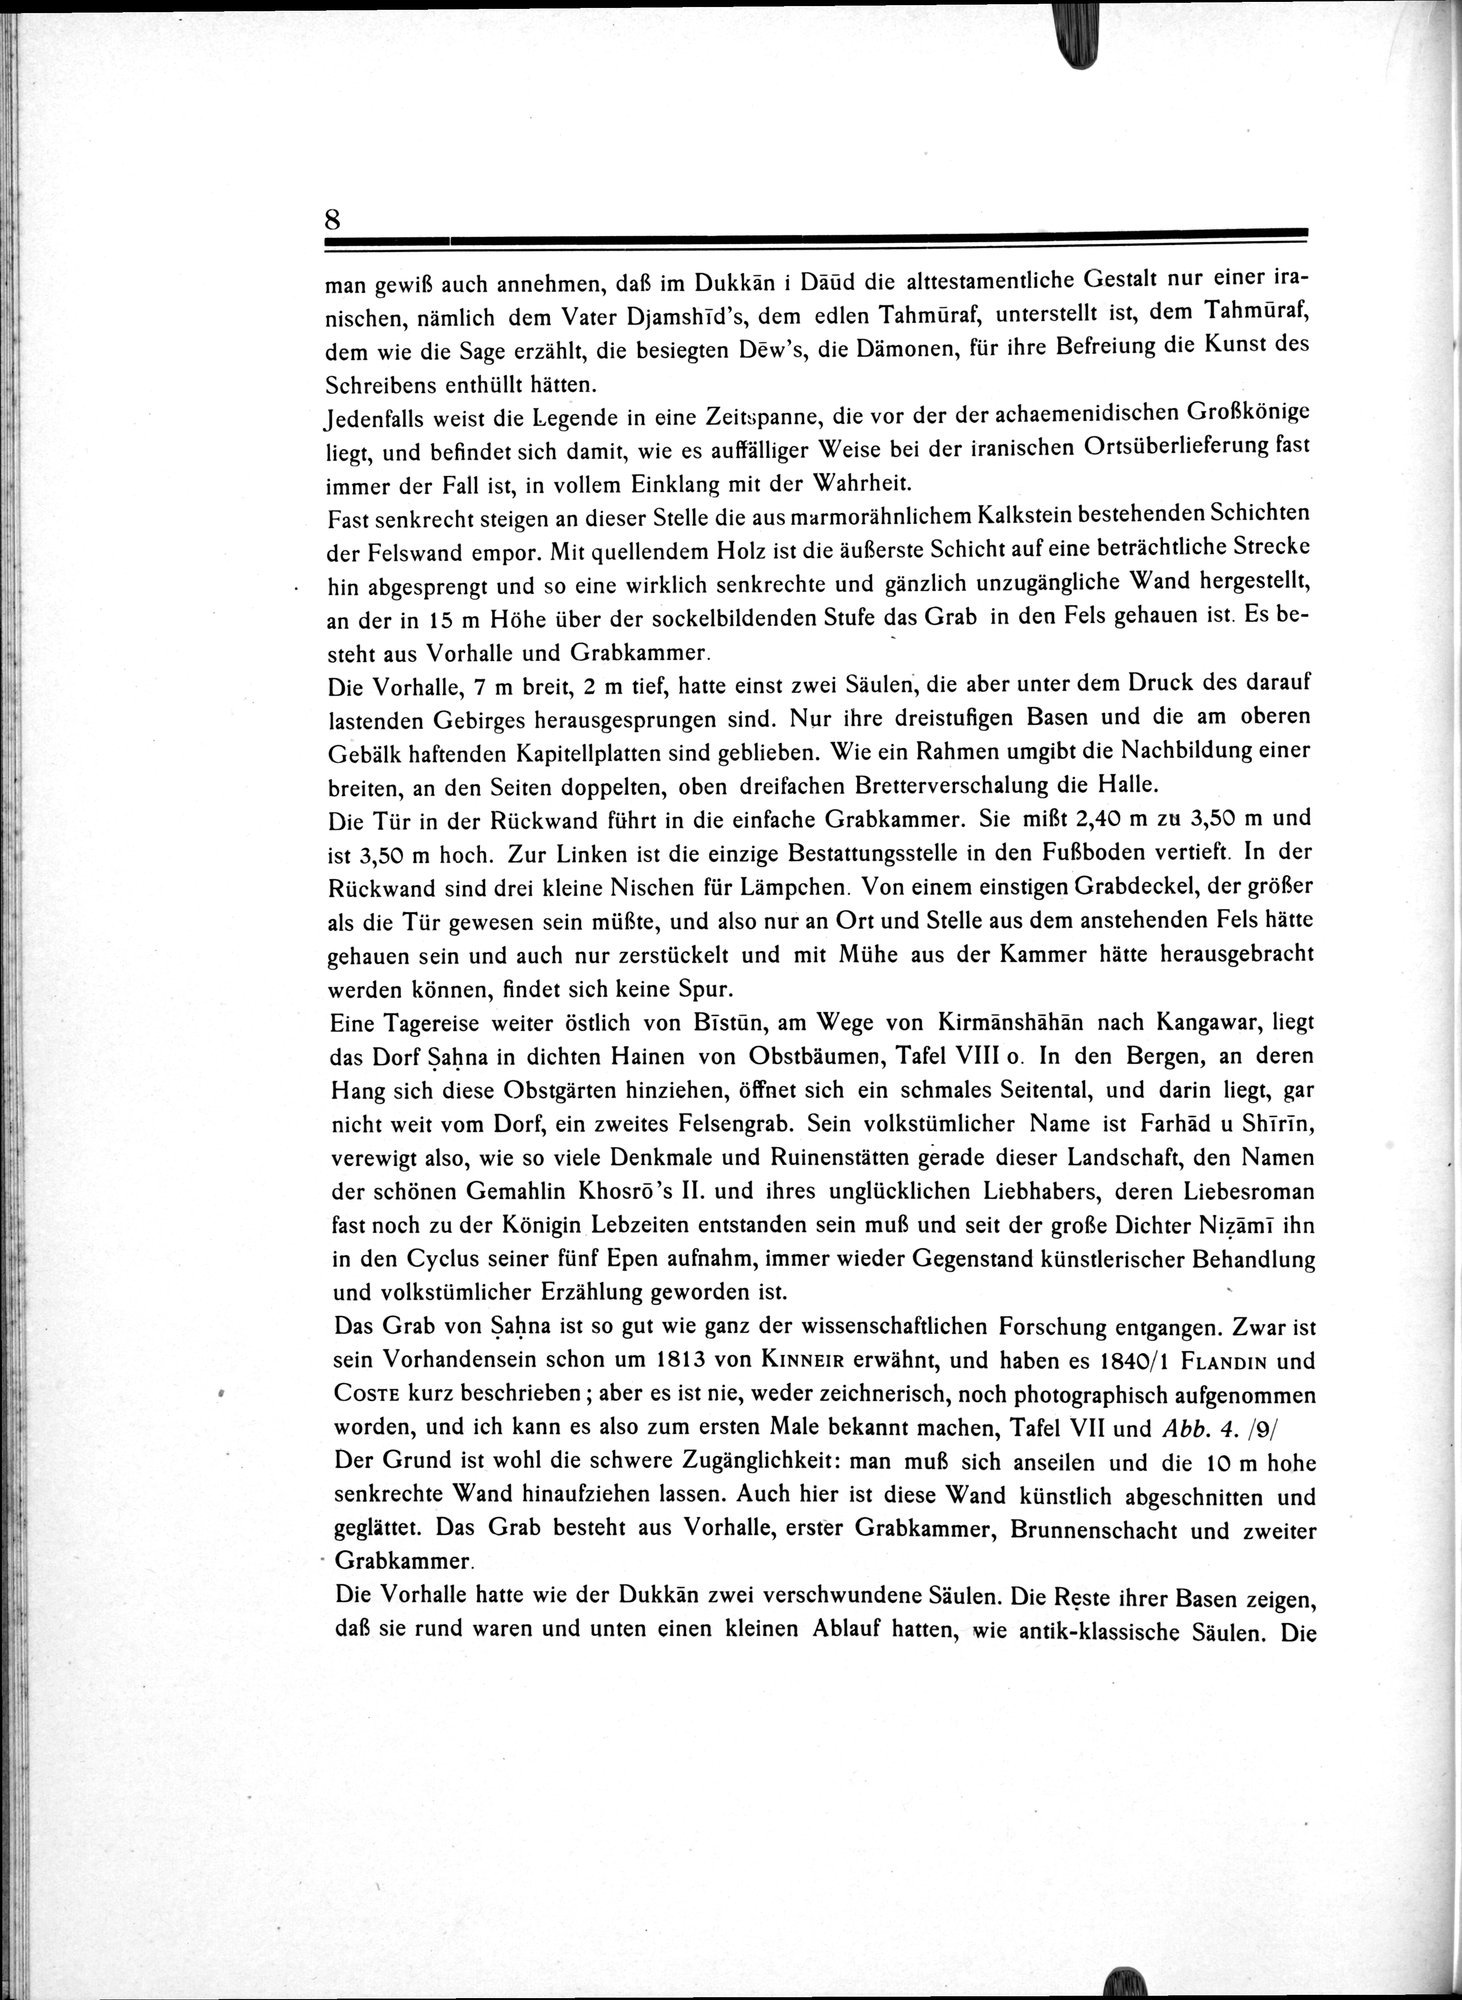 Am Tor von Asien : vol.1 / Page 26 (Grayscale High Resolution Image)